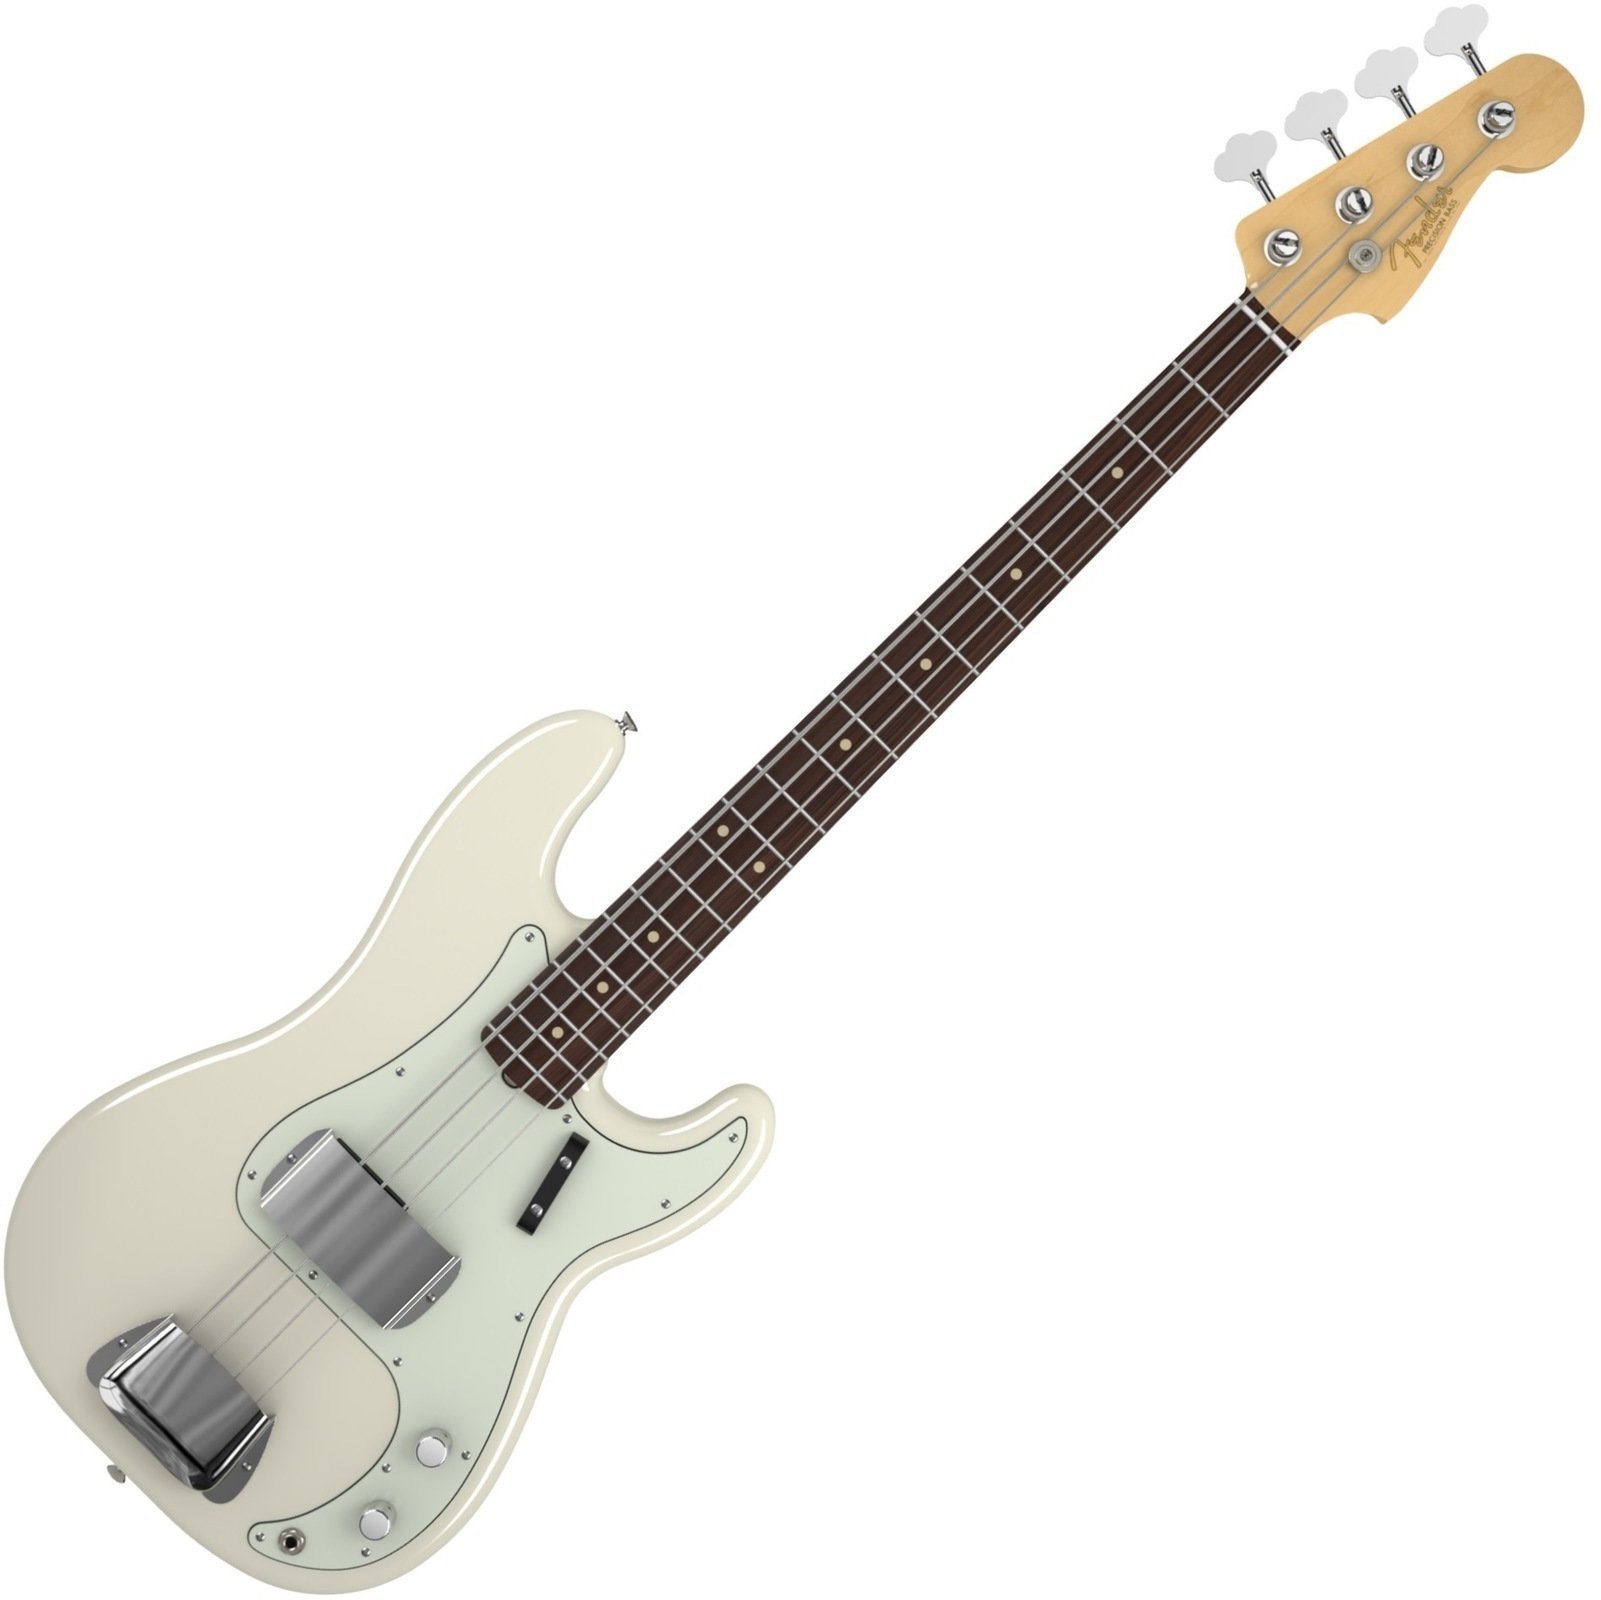 E-Bass Fender American Vintage '63 Precision Bass, Rosewood Fingerboard, Olympic White